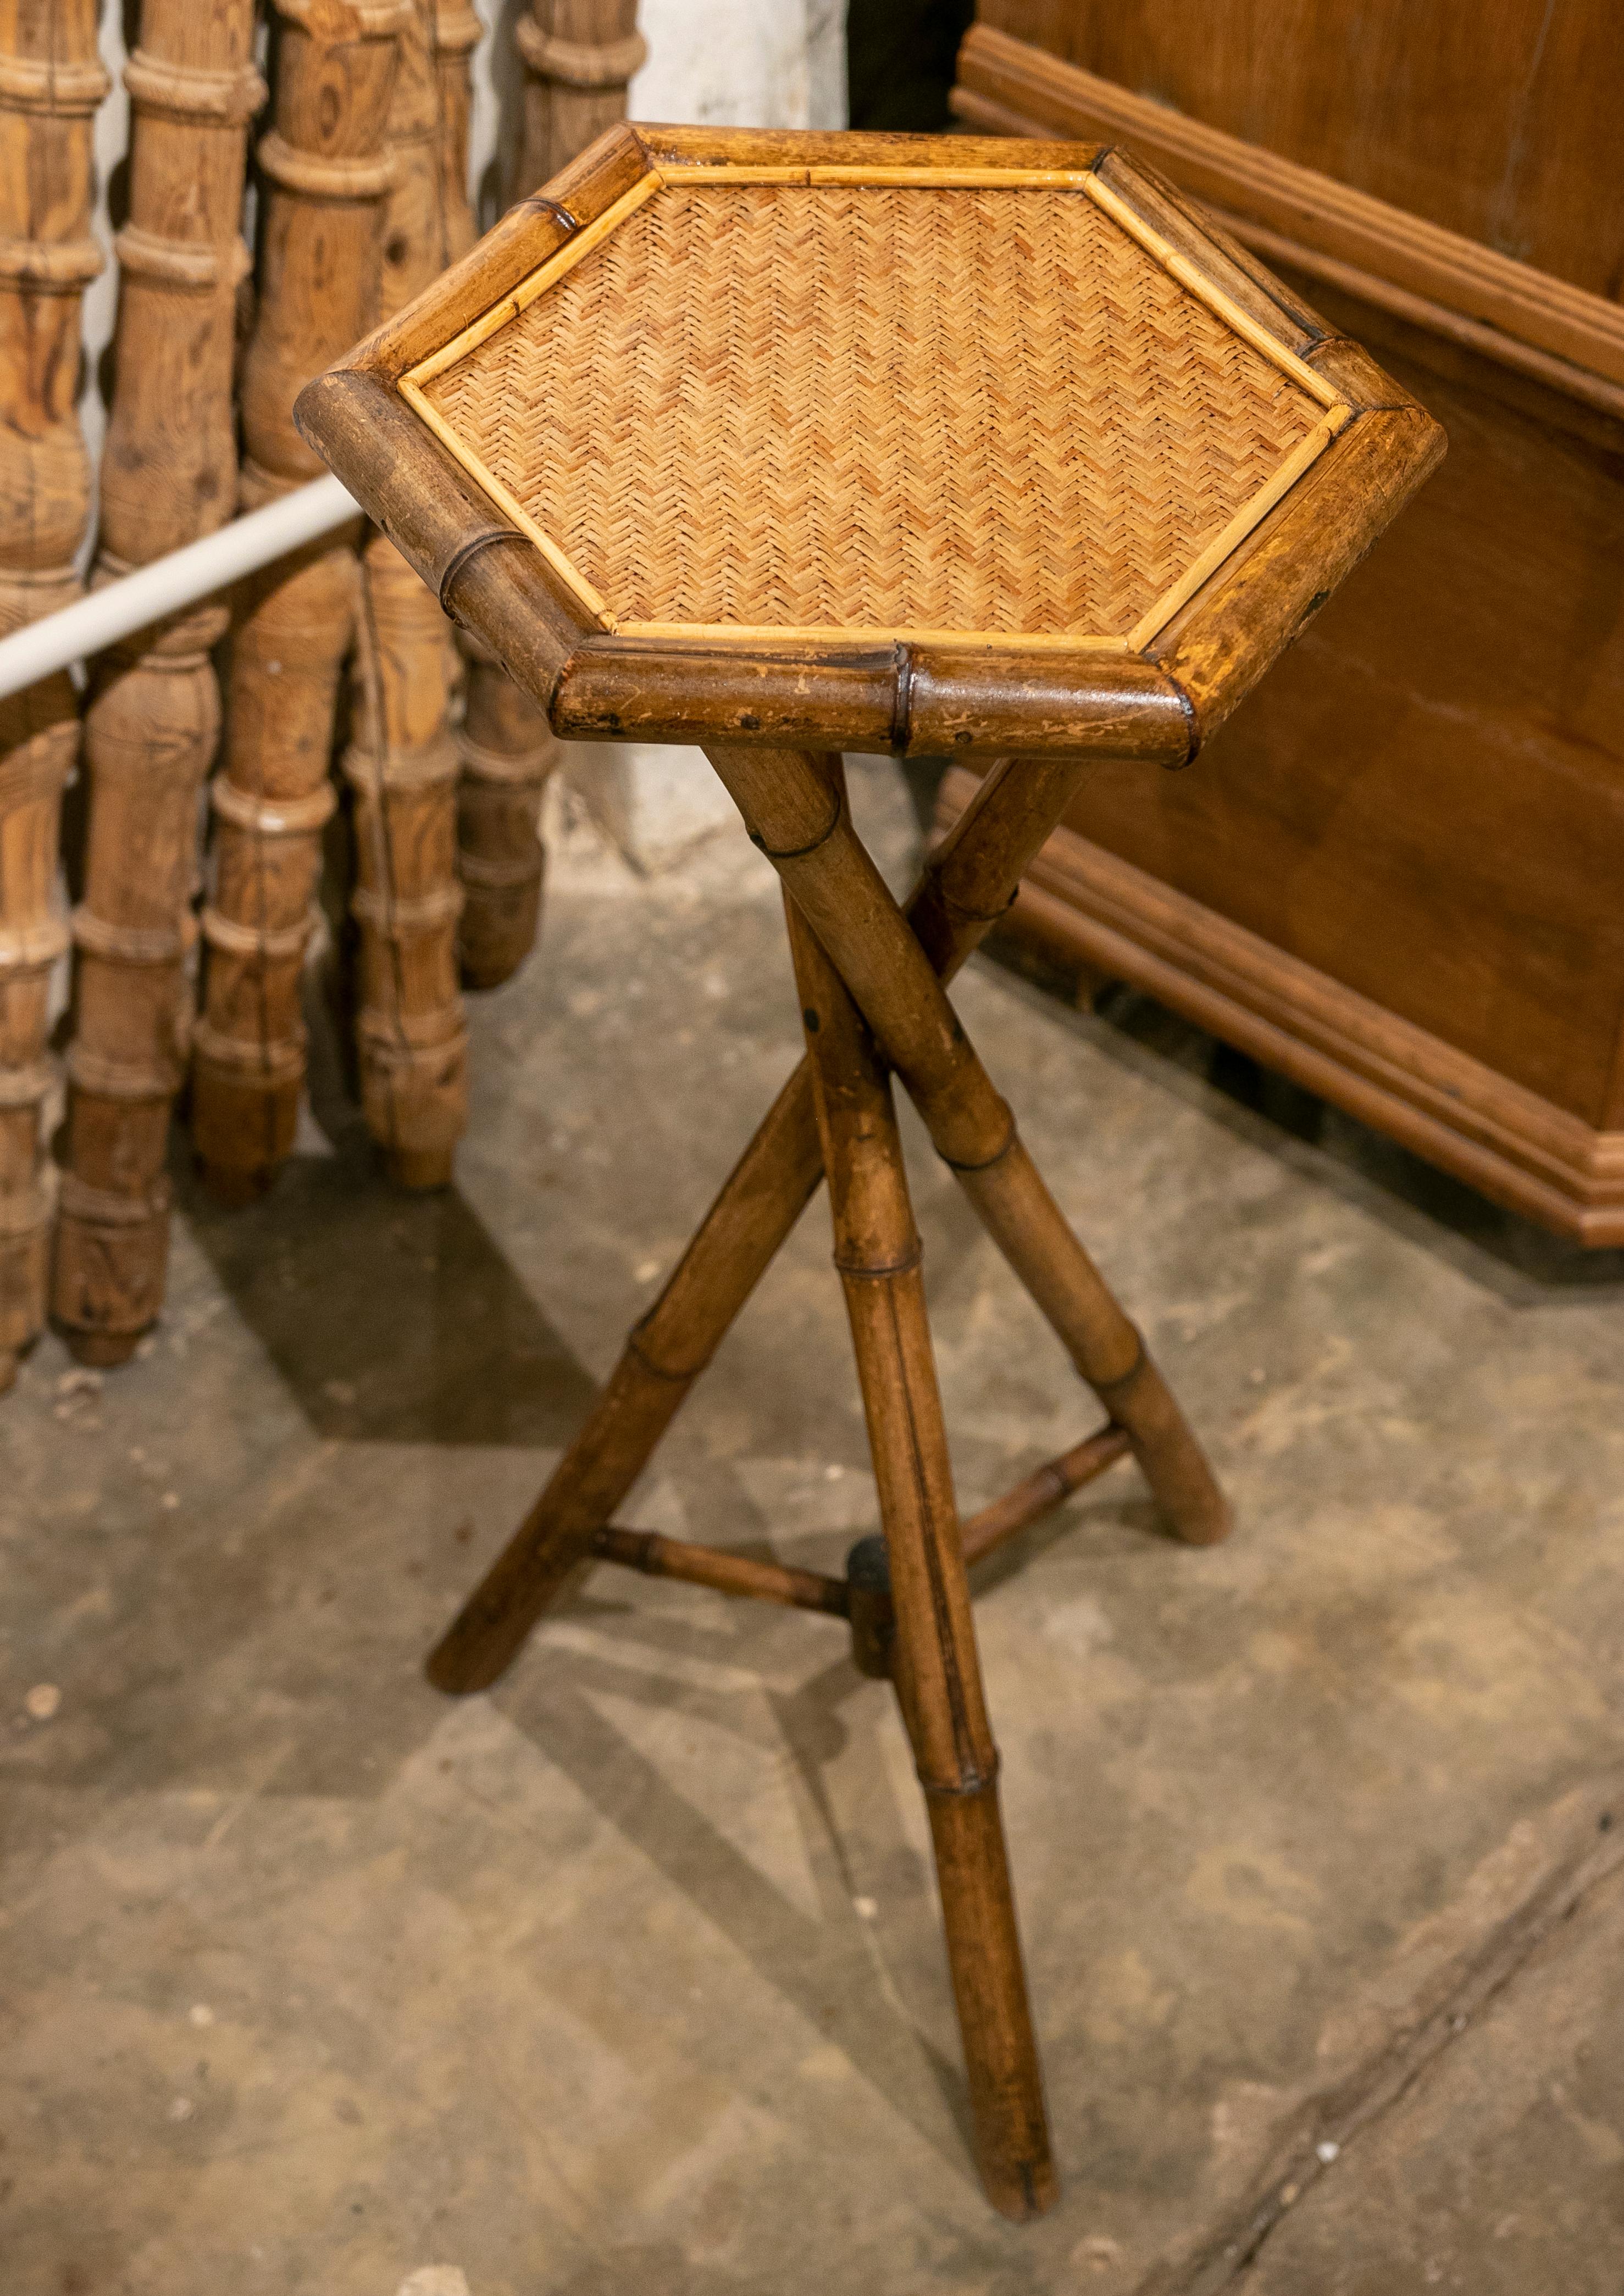 1970s Spanish Bamboo and Wicker Sidetable with Hexagonal Top For Sale 5